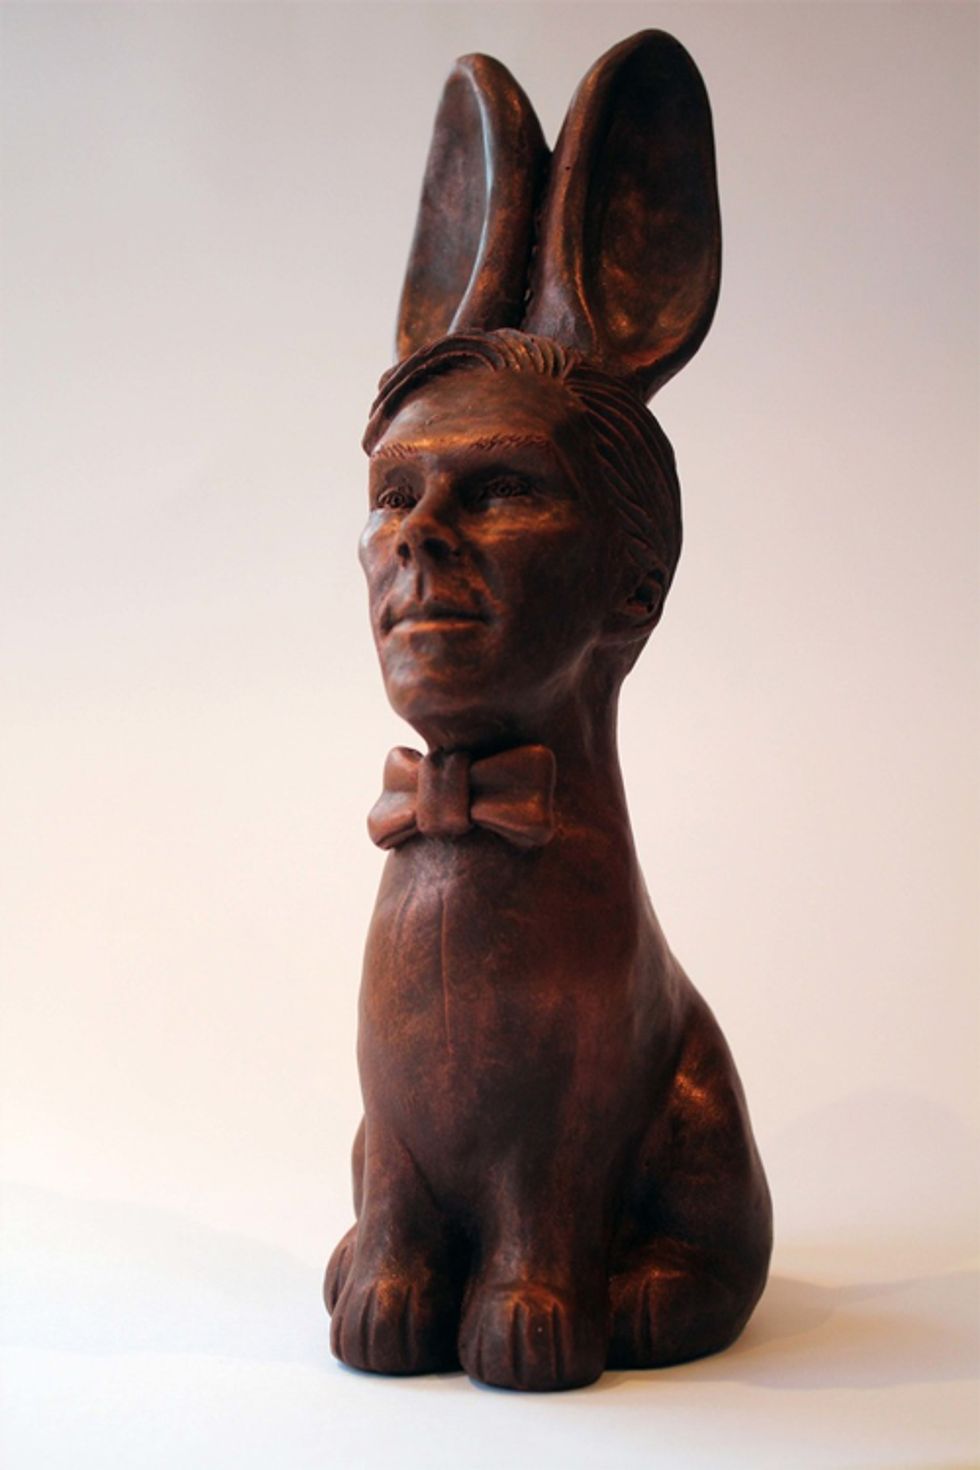 Behold The Benedict Cumberbunny, Ye Mortals, And Weep! Your Saturday Nerdout